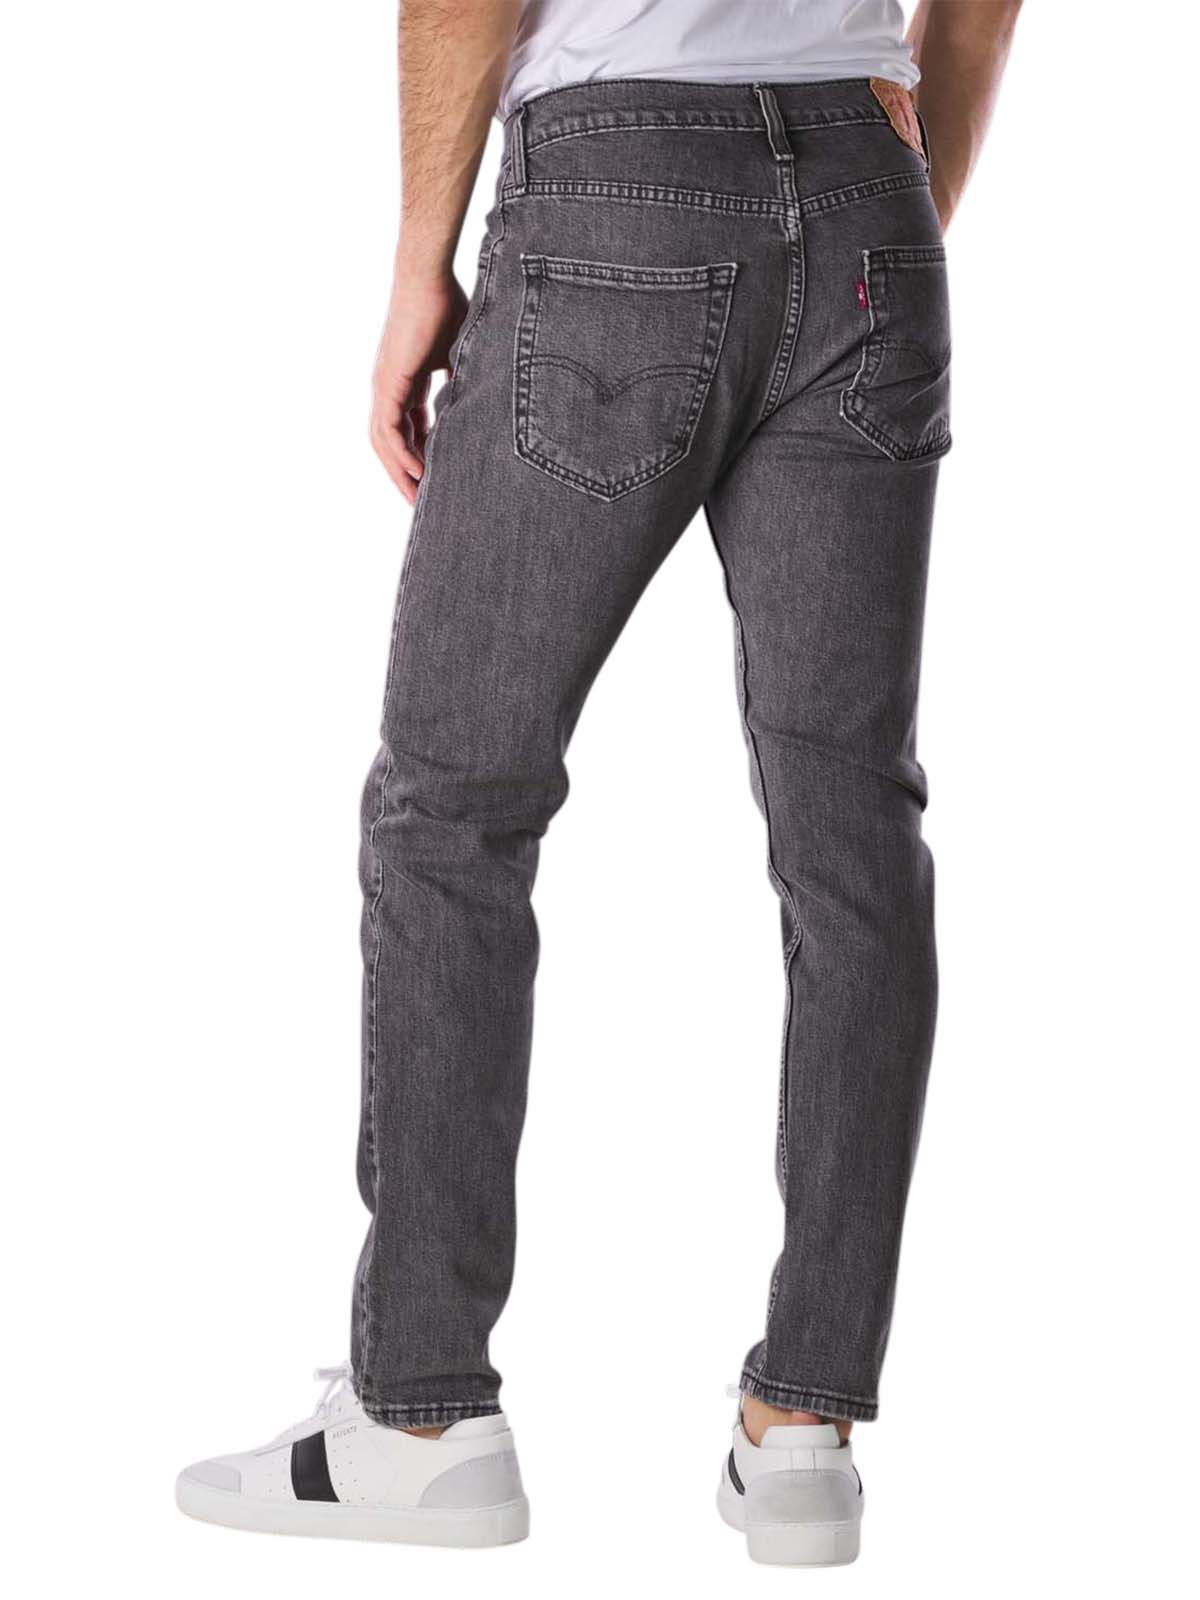 Levi's 512 Jeans Slim Tapered farfar away Levi's Men's Jeans | Free  Shipping on  - SIMPLY LOOK GOOD